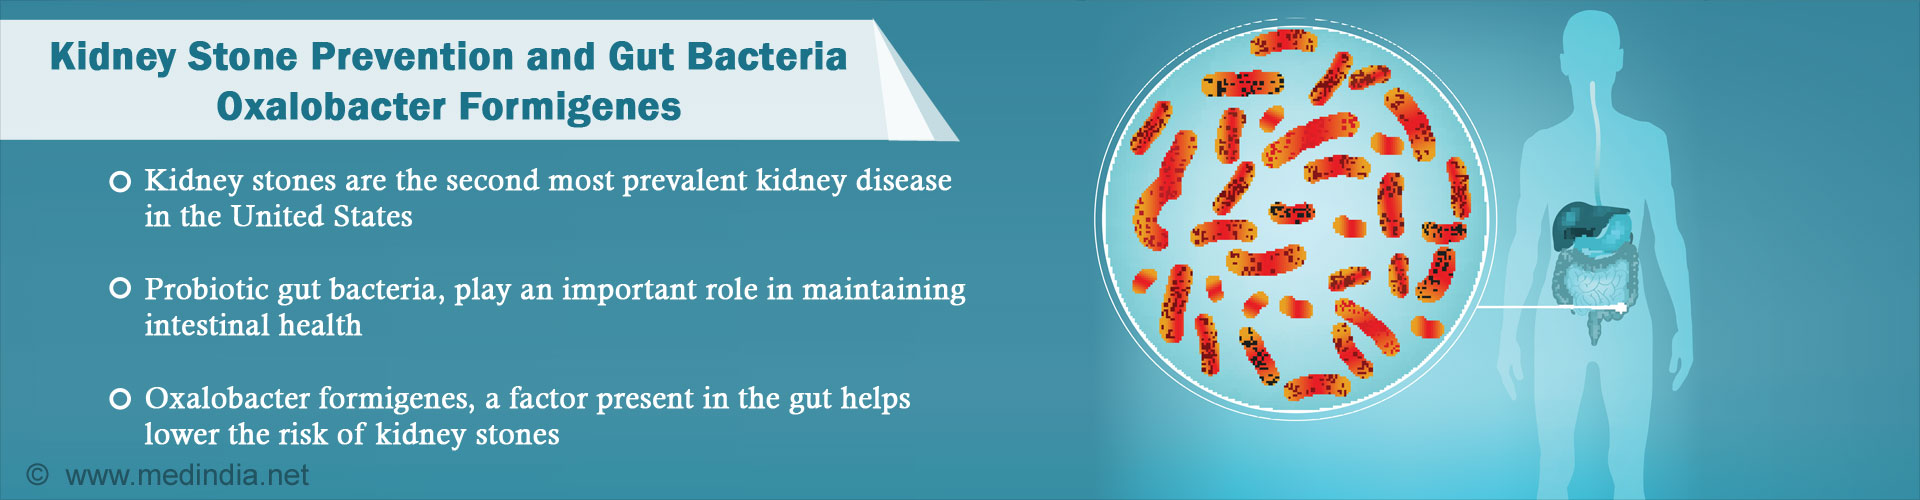 kidney-stone-prevention-and-gut-bacteria-oxalobacter-formigenes.jpg